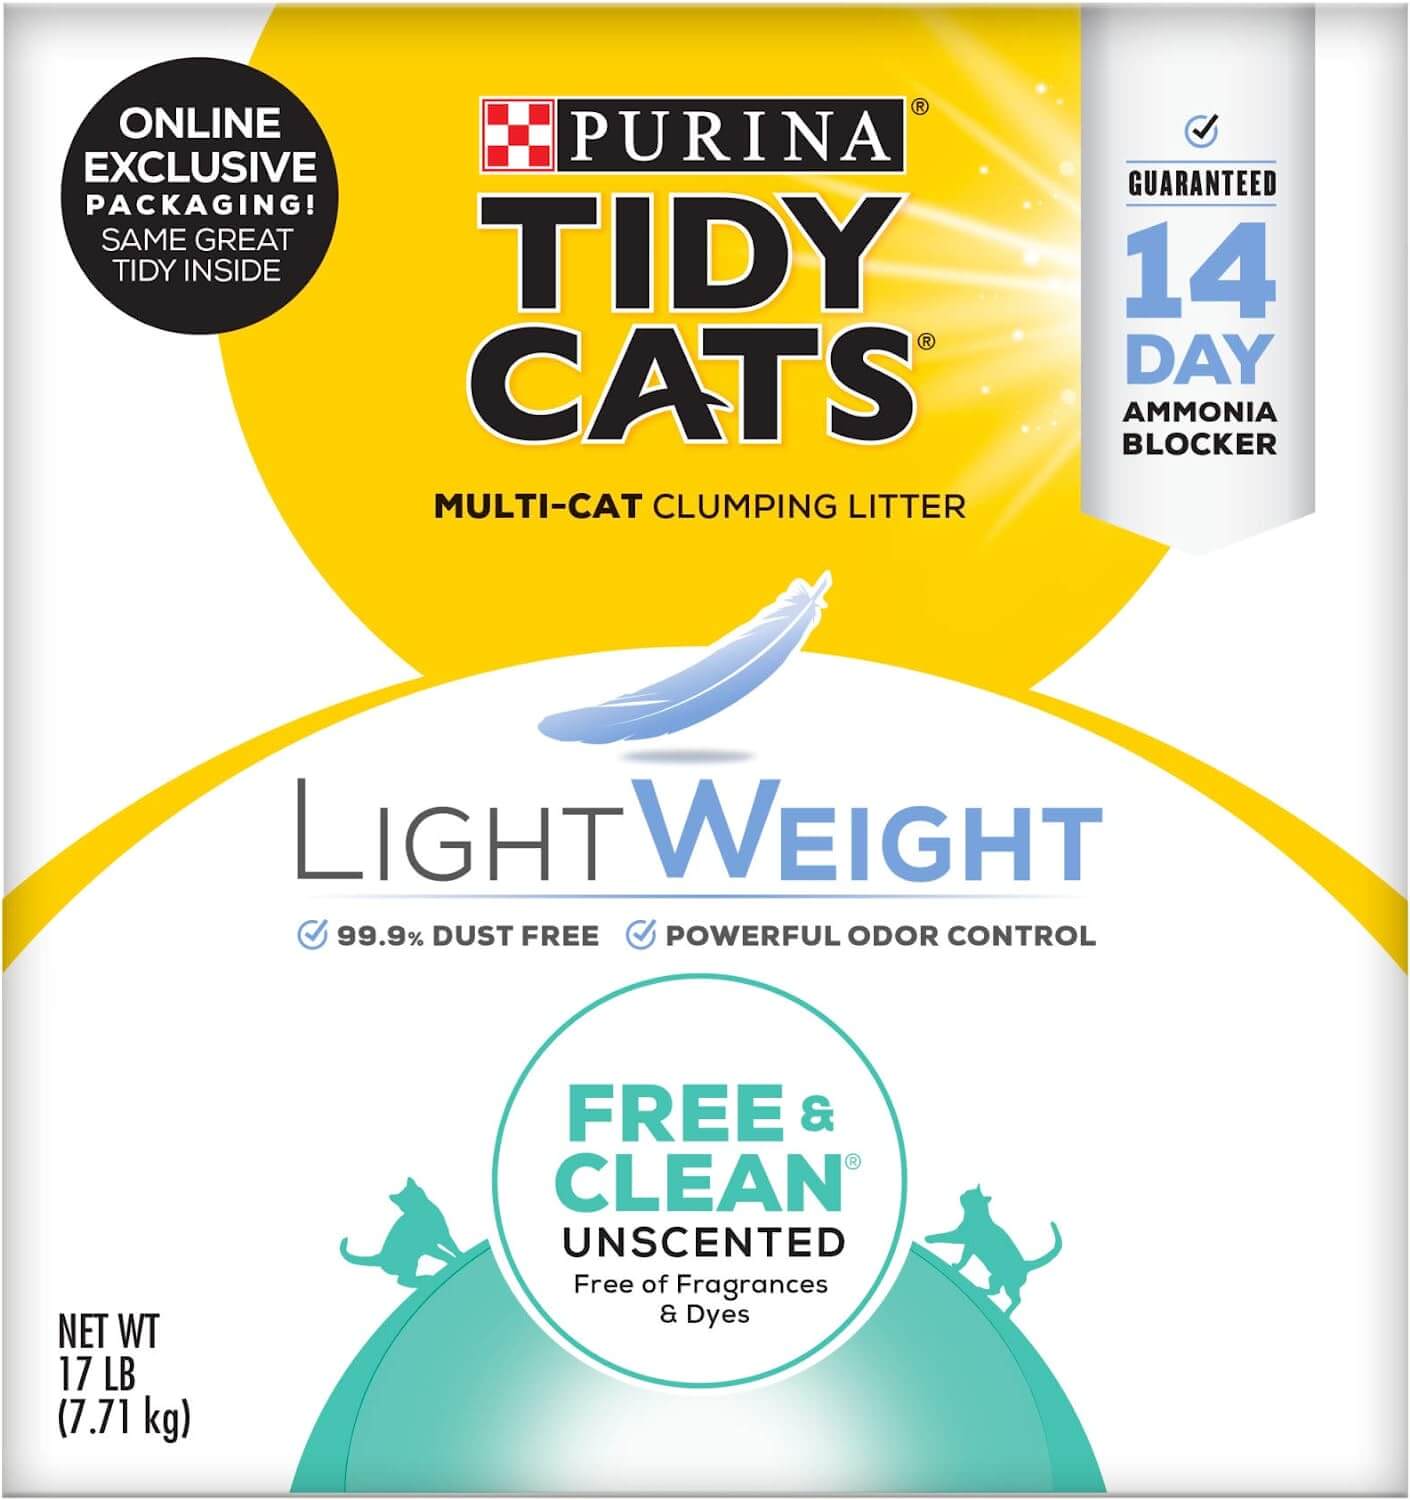 Purina Tidy Cats Low Dust Clumping Cat Litter